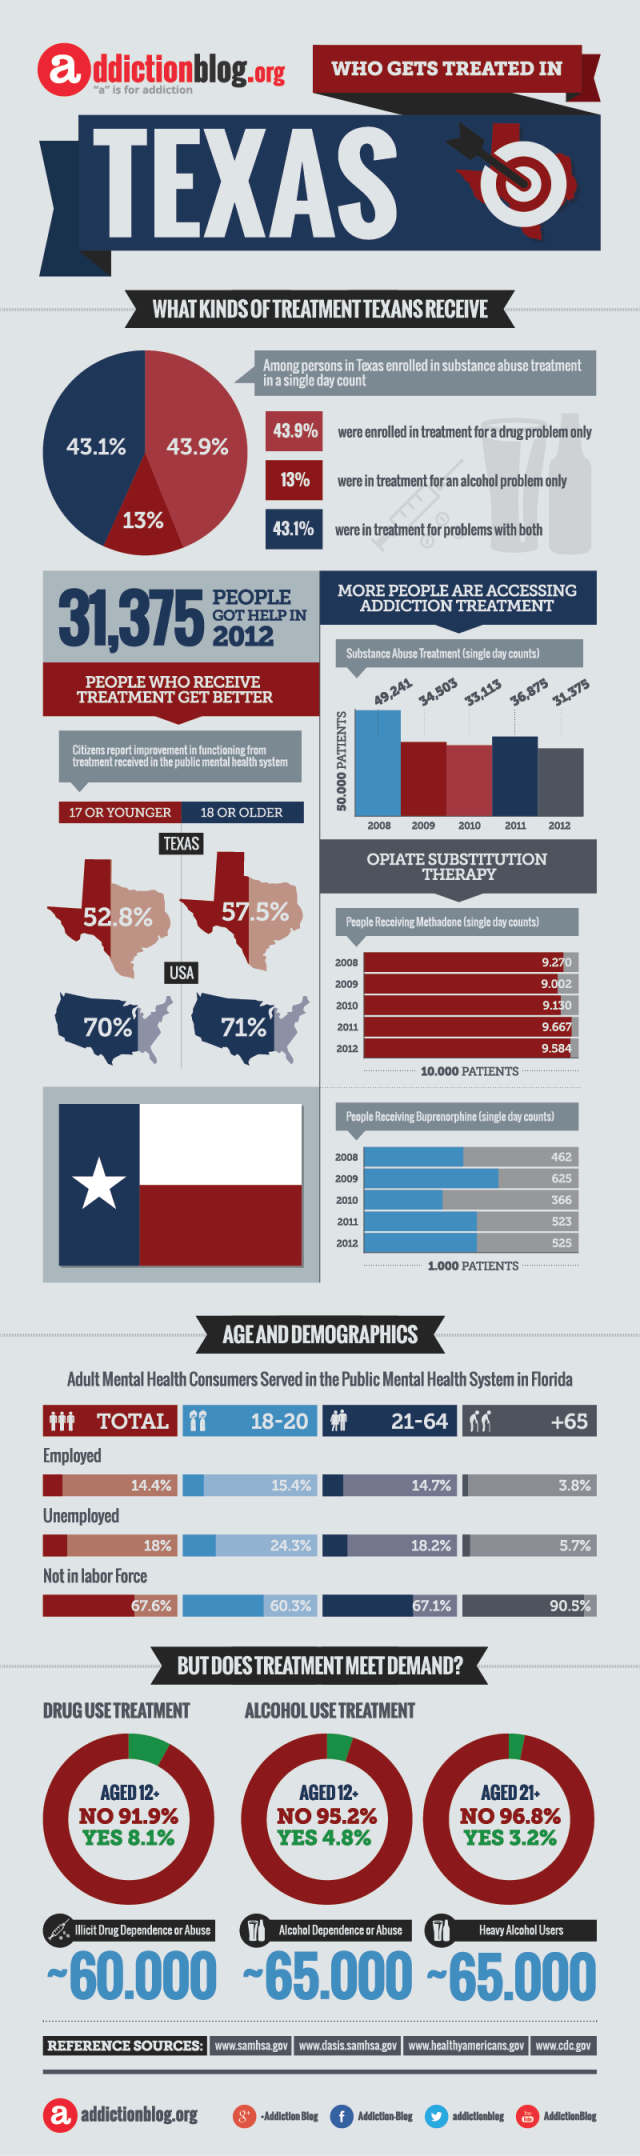 Texas rehab centers: Who’s getting treated? (INFOGRAPHIC)